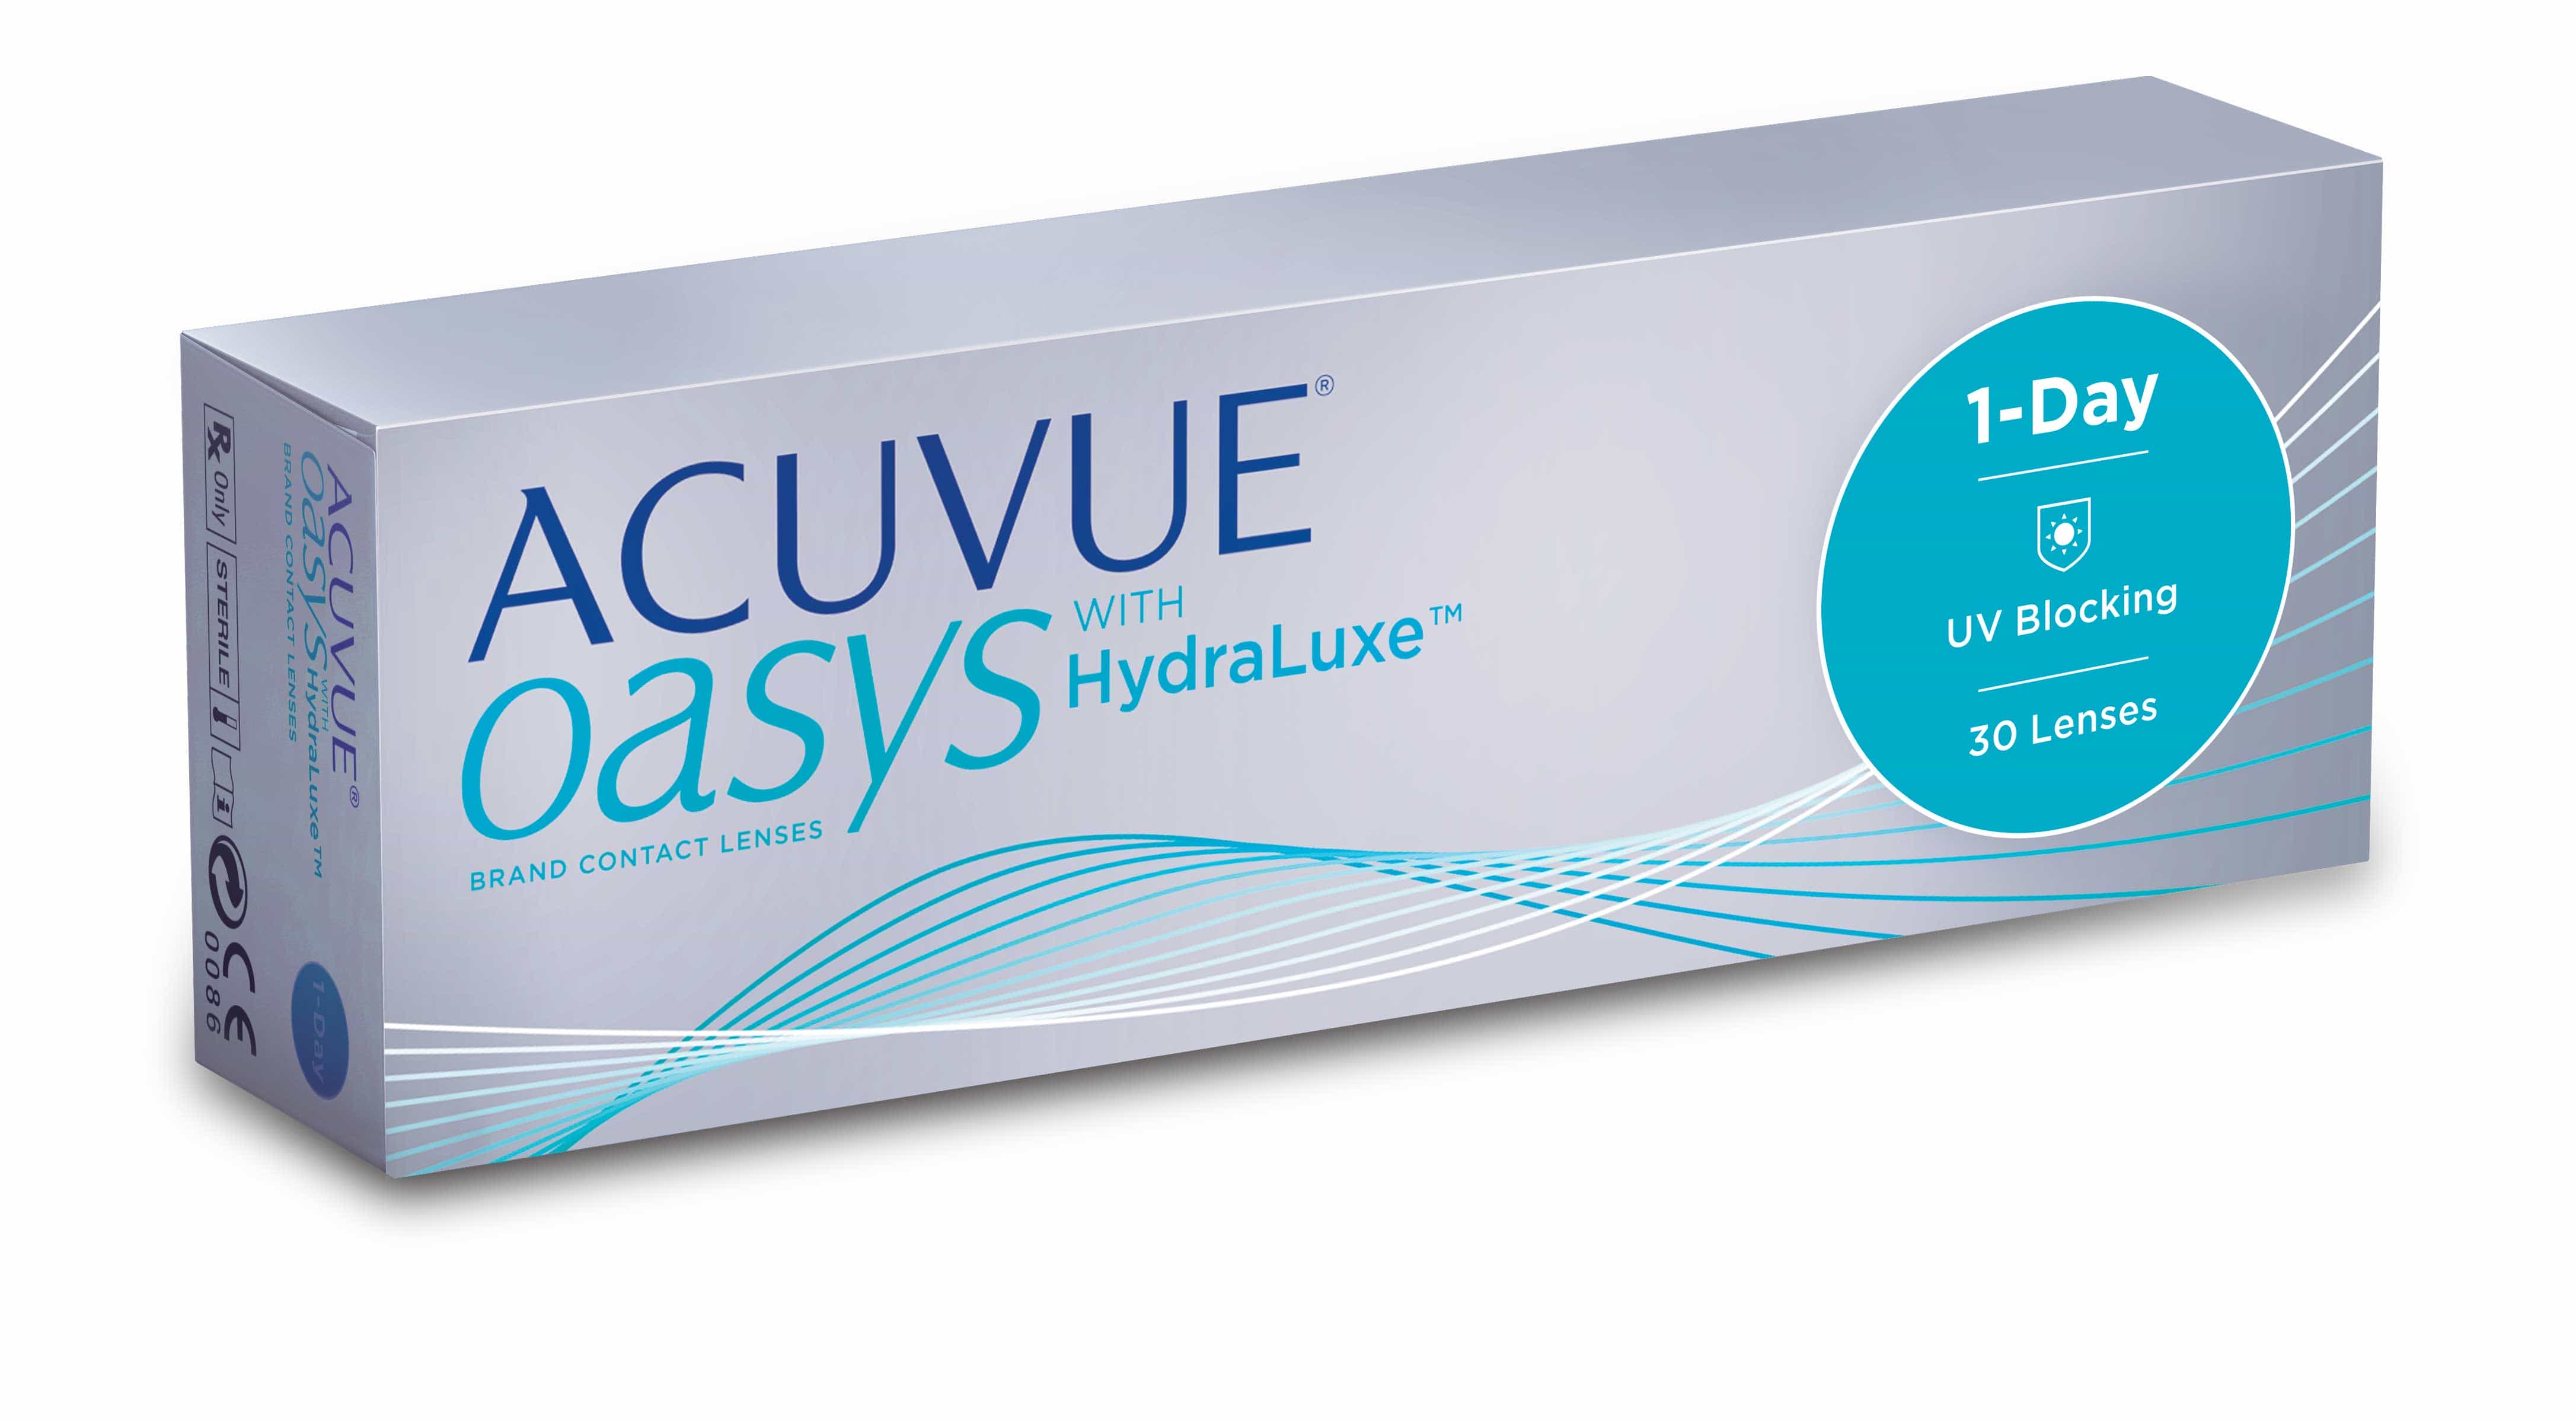 acuvue-oasys-1-day-with-hydraluxe-technology-acuvue-brand-contact